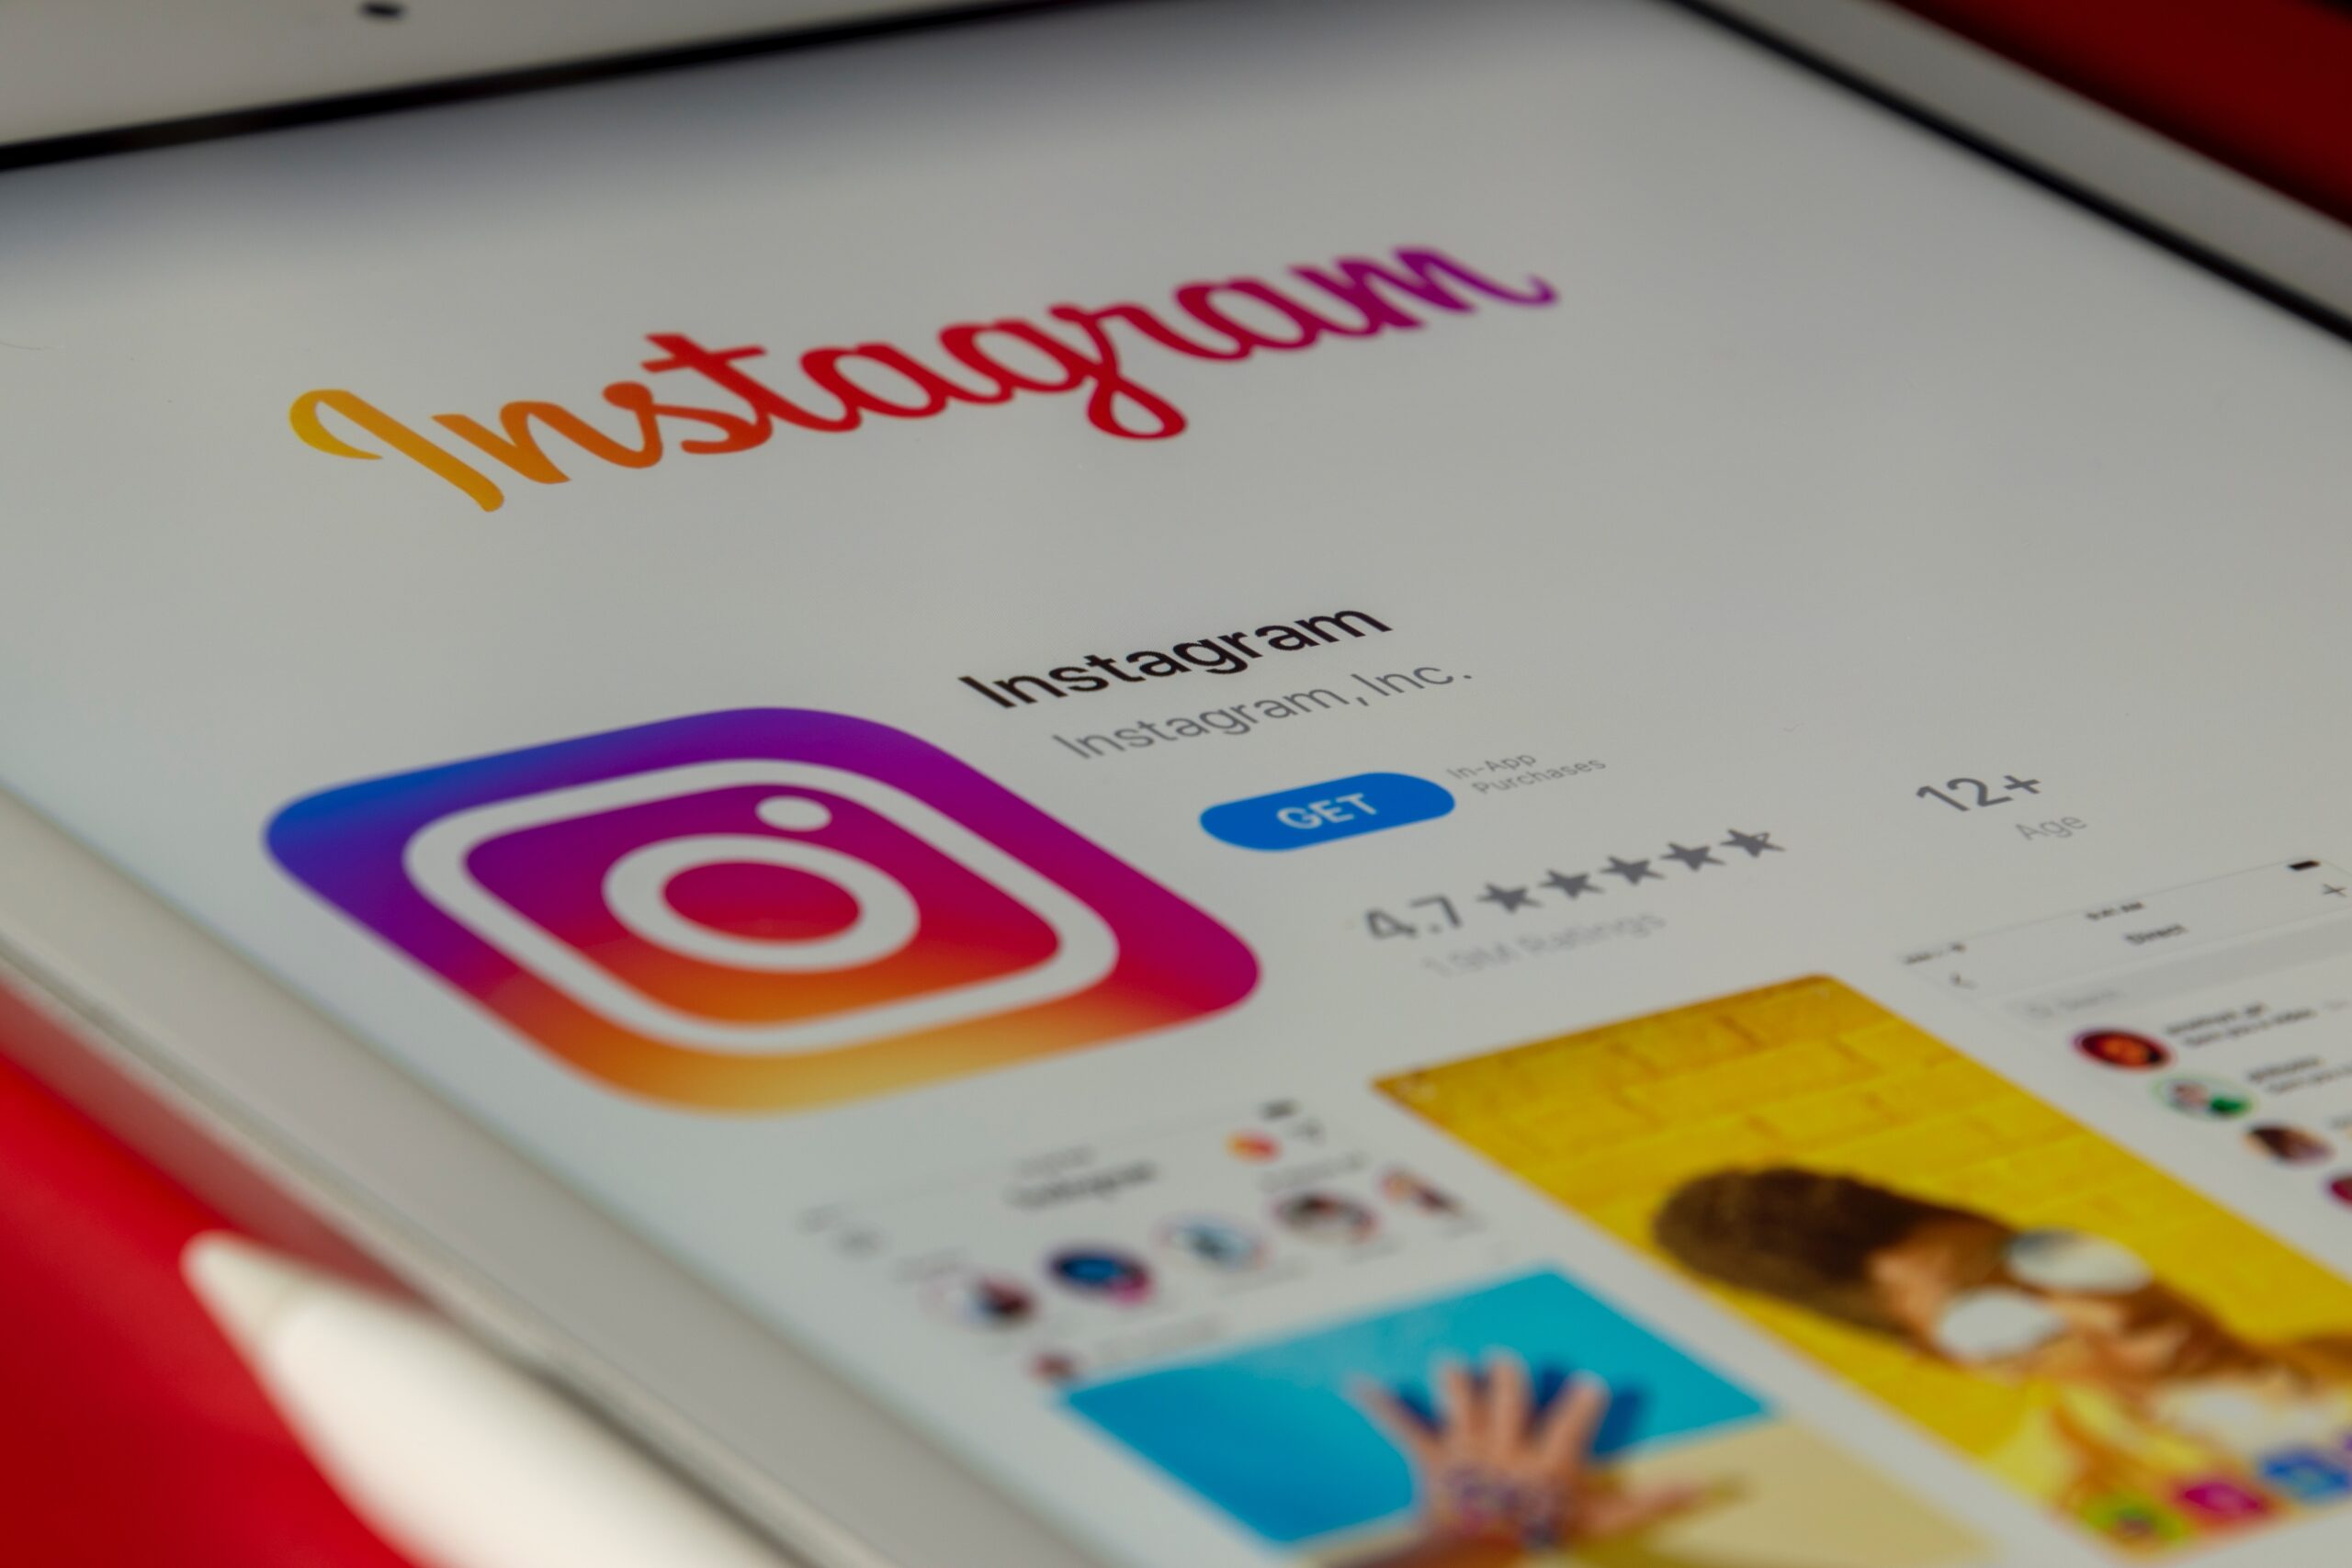 Find out who your Instagram fans and followers are